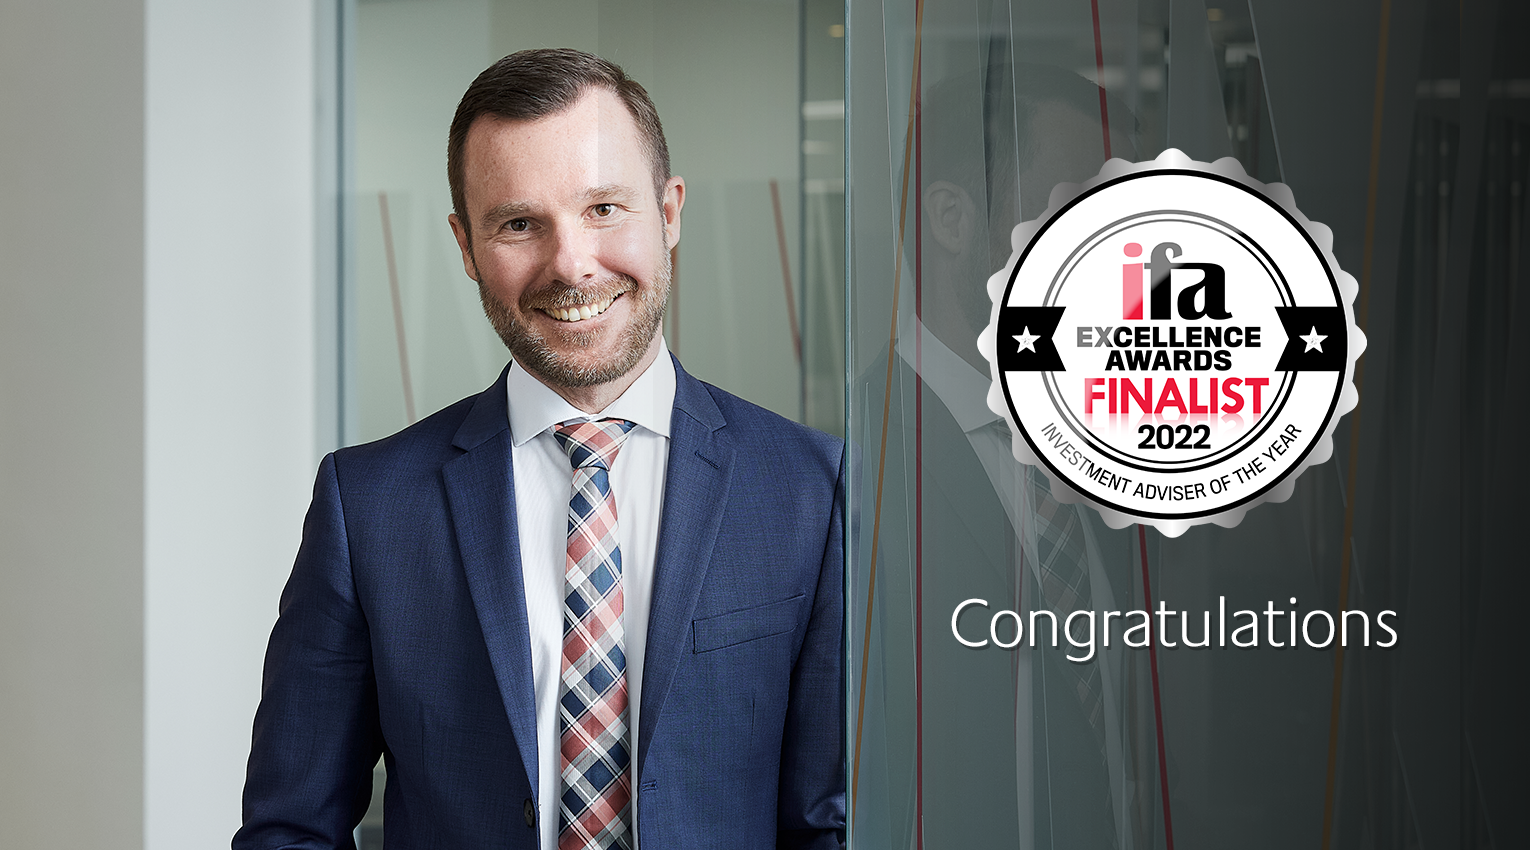 Financial Adviser Ben Travers has been shortlisted for the ifa Excellence Awards 2022